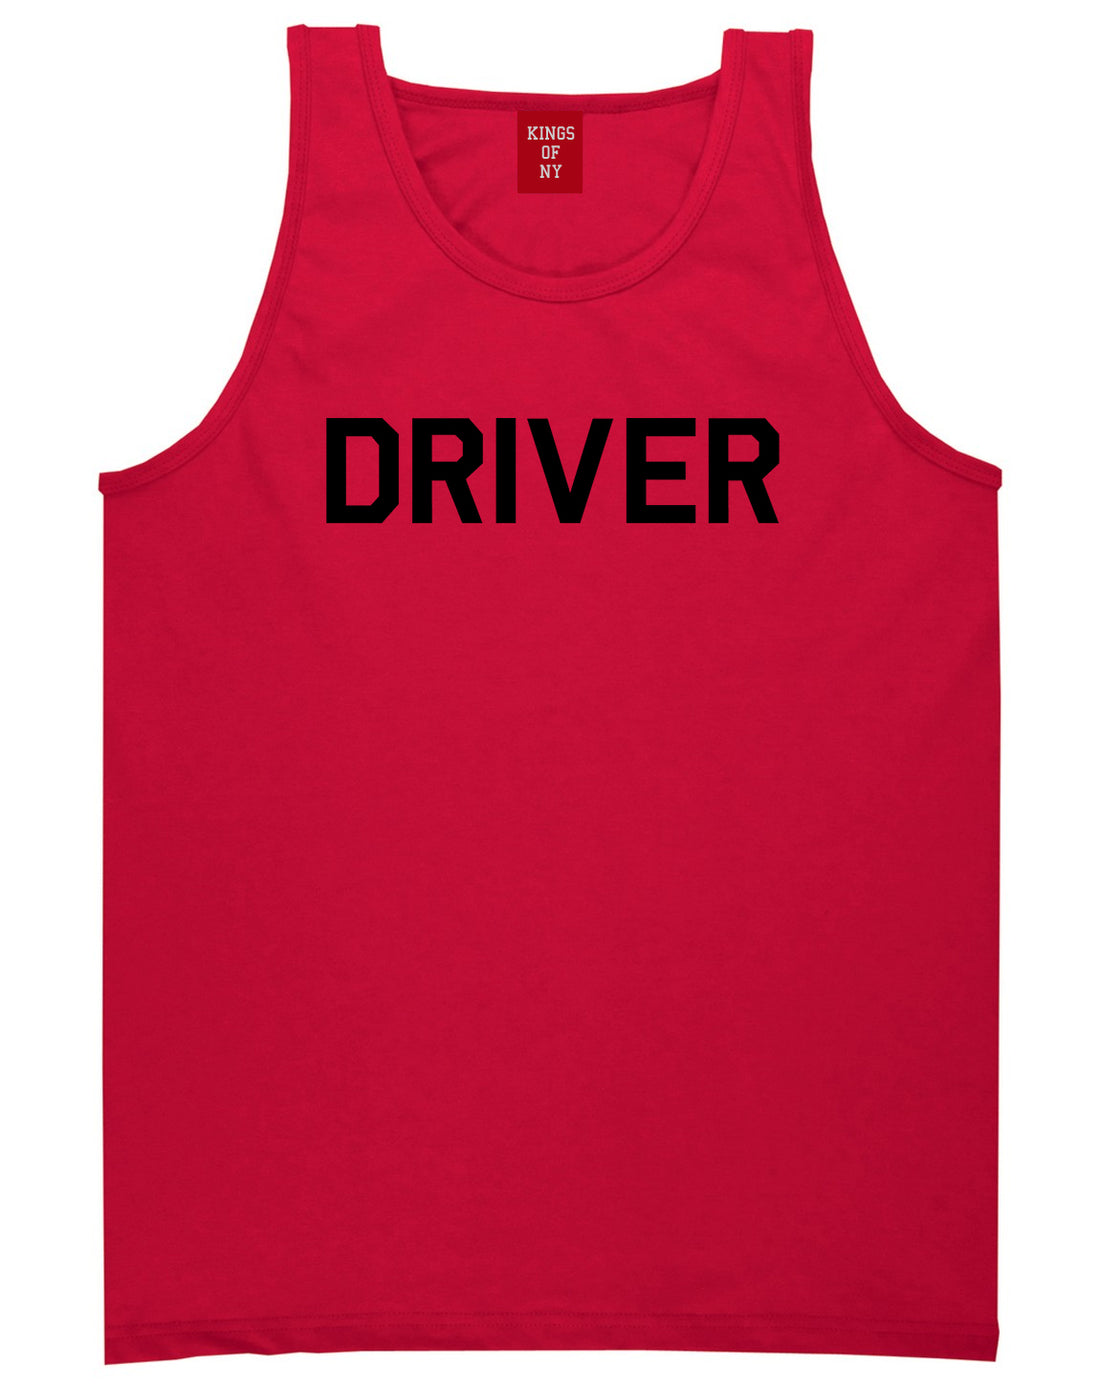 Driver_Drive Mens Red Tank Top Shirt by Kings Of NY